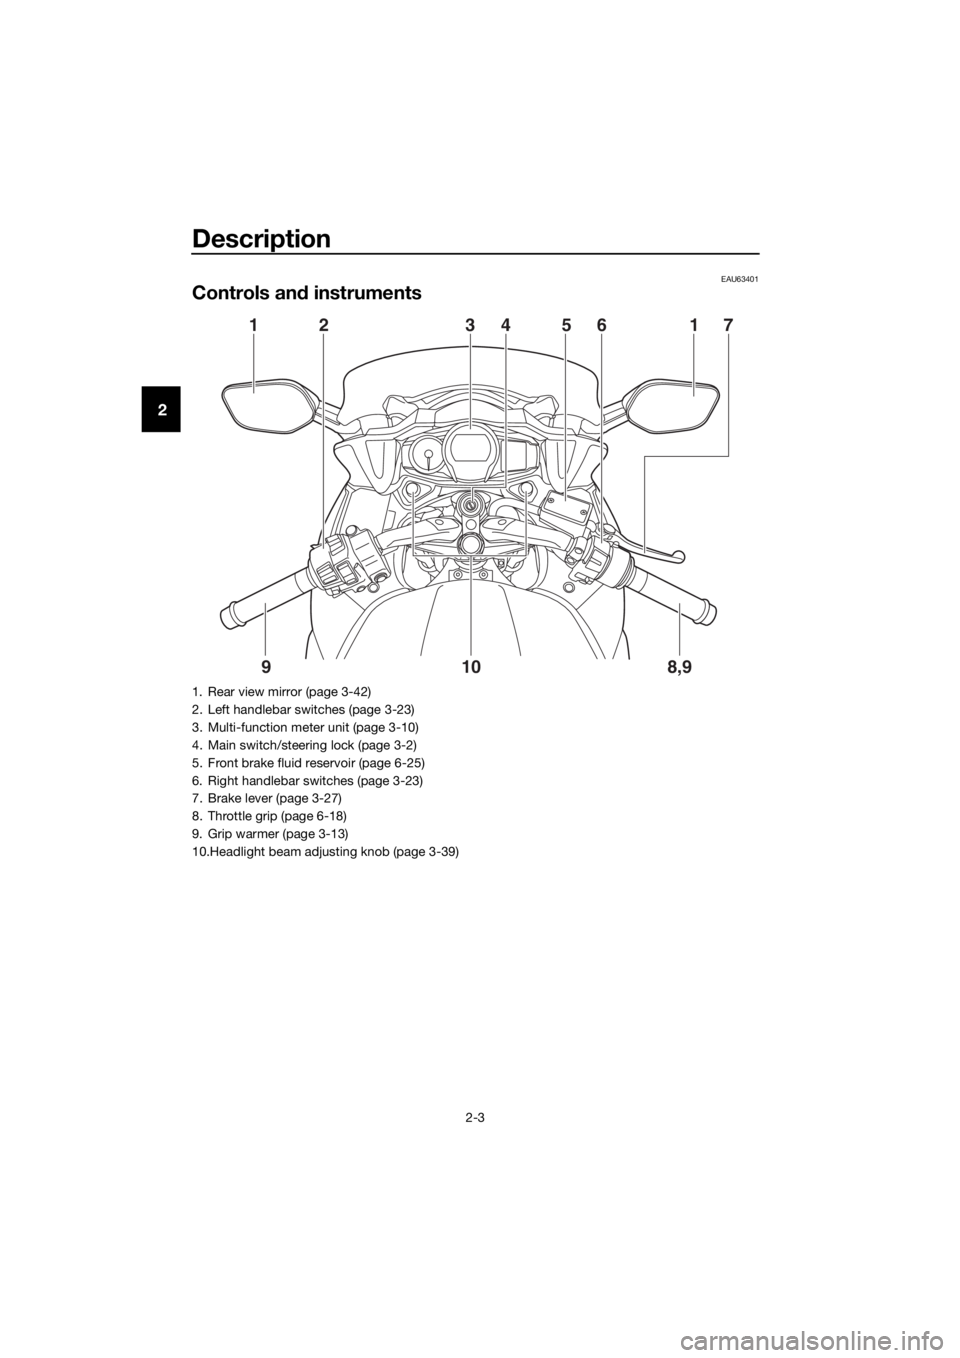 YAMAHA FJR1300AS 2018 User Guide Description
2-3
2
EAU63401
Controls and instruments
12 3456 17
8,9
10
9
1. Rear view mirror (page 3-42)
2. Left handlebar switches (page 3-23)
3. Multi-function meter unit (page 3-10)
4. Main switch/s